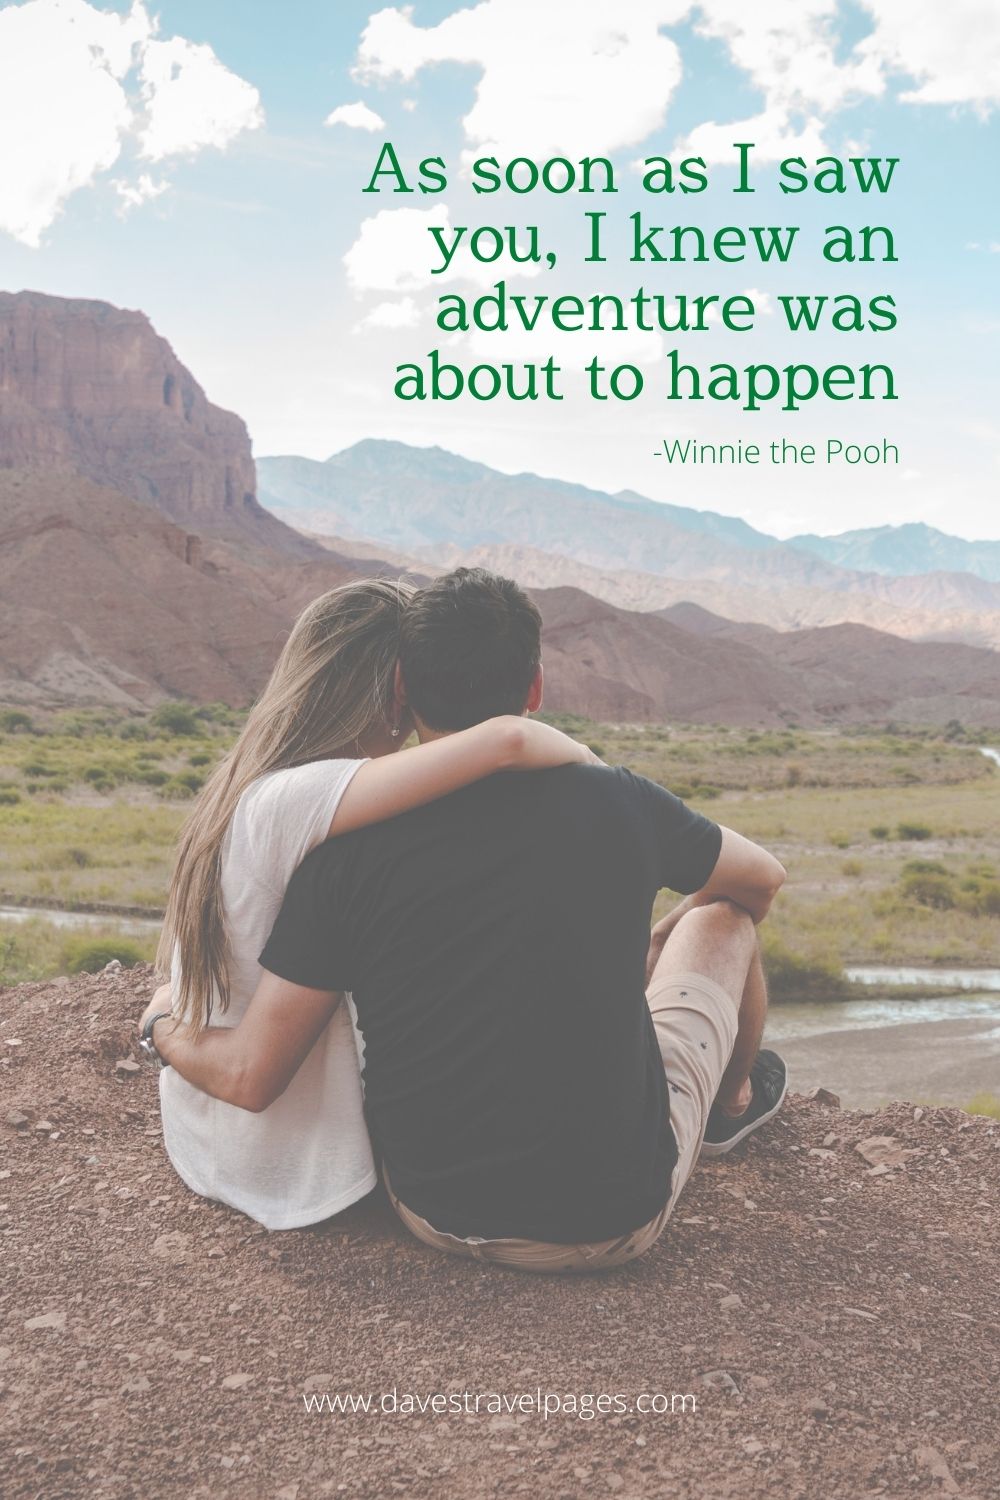 As soon as I saw you, I knew an adventure was about to happen